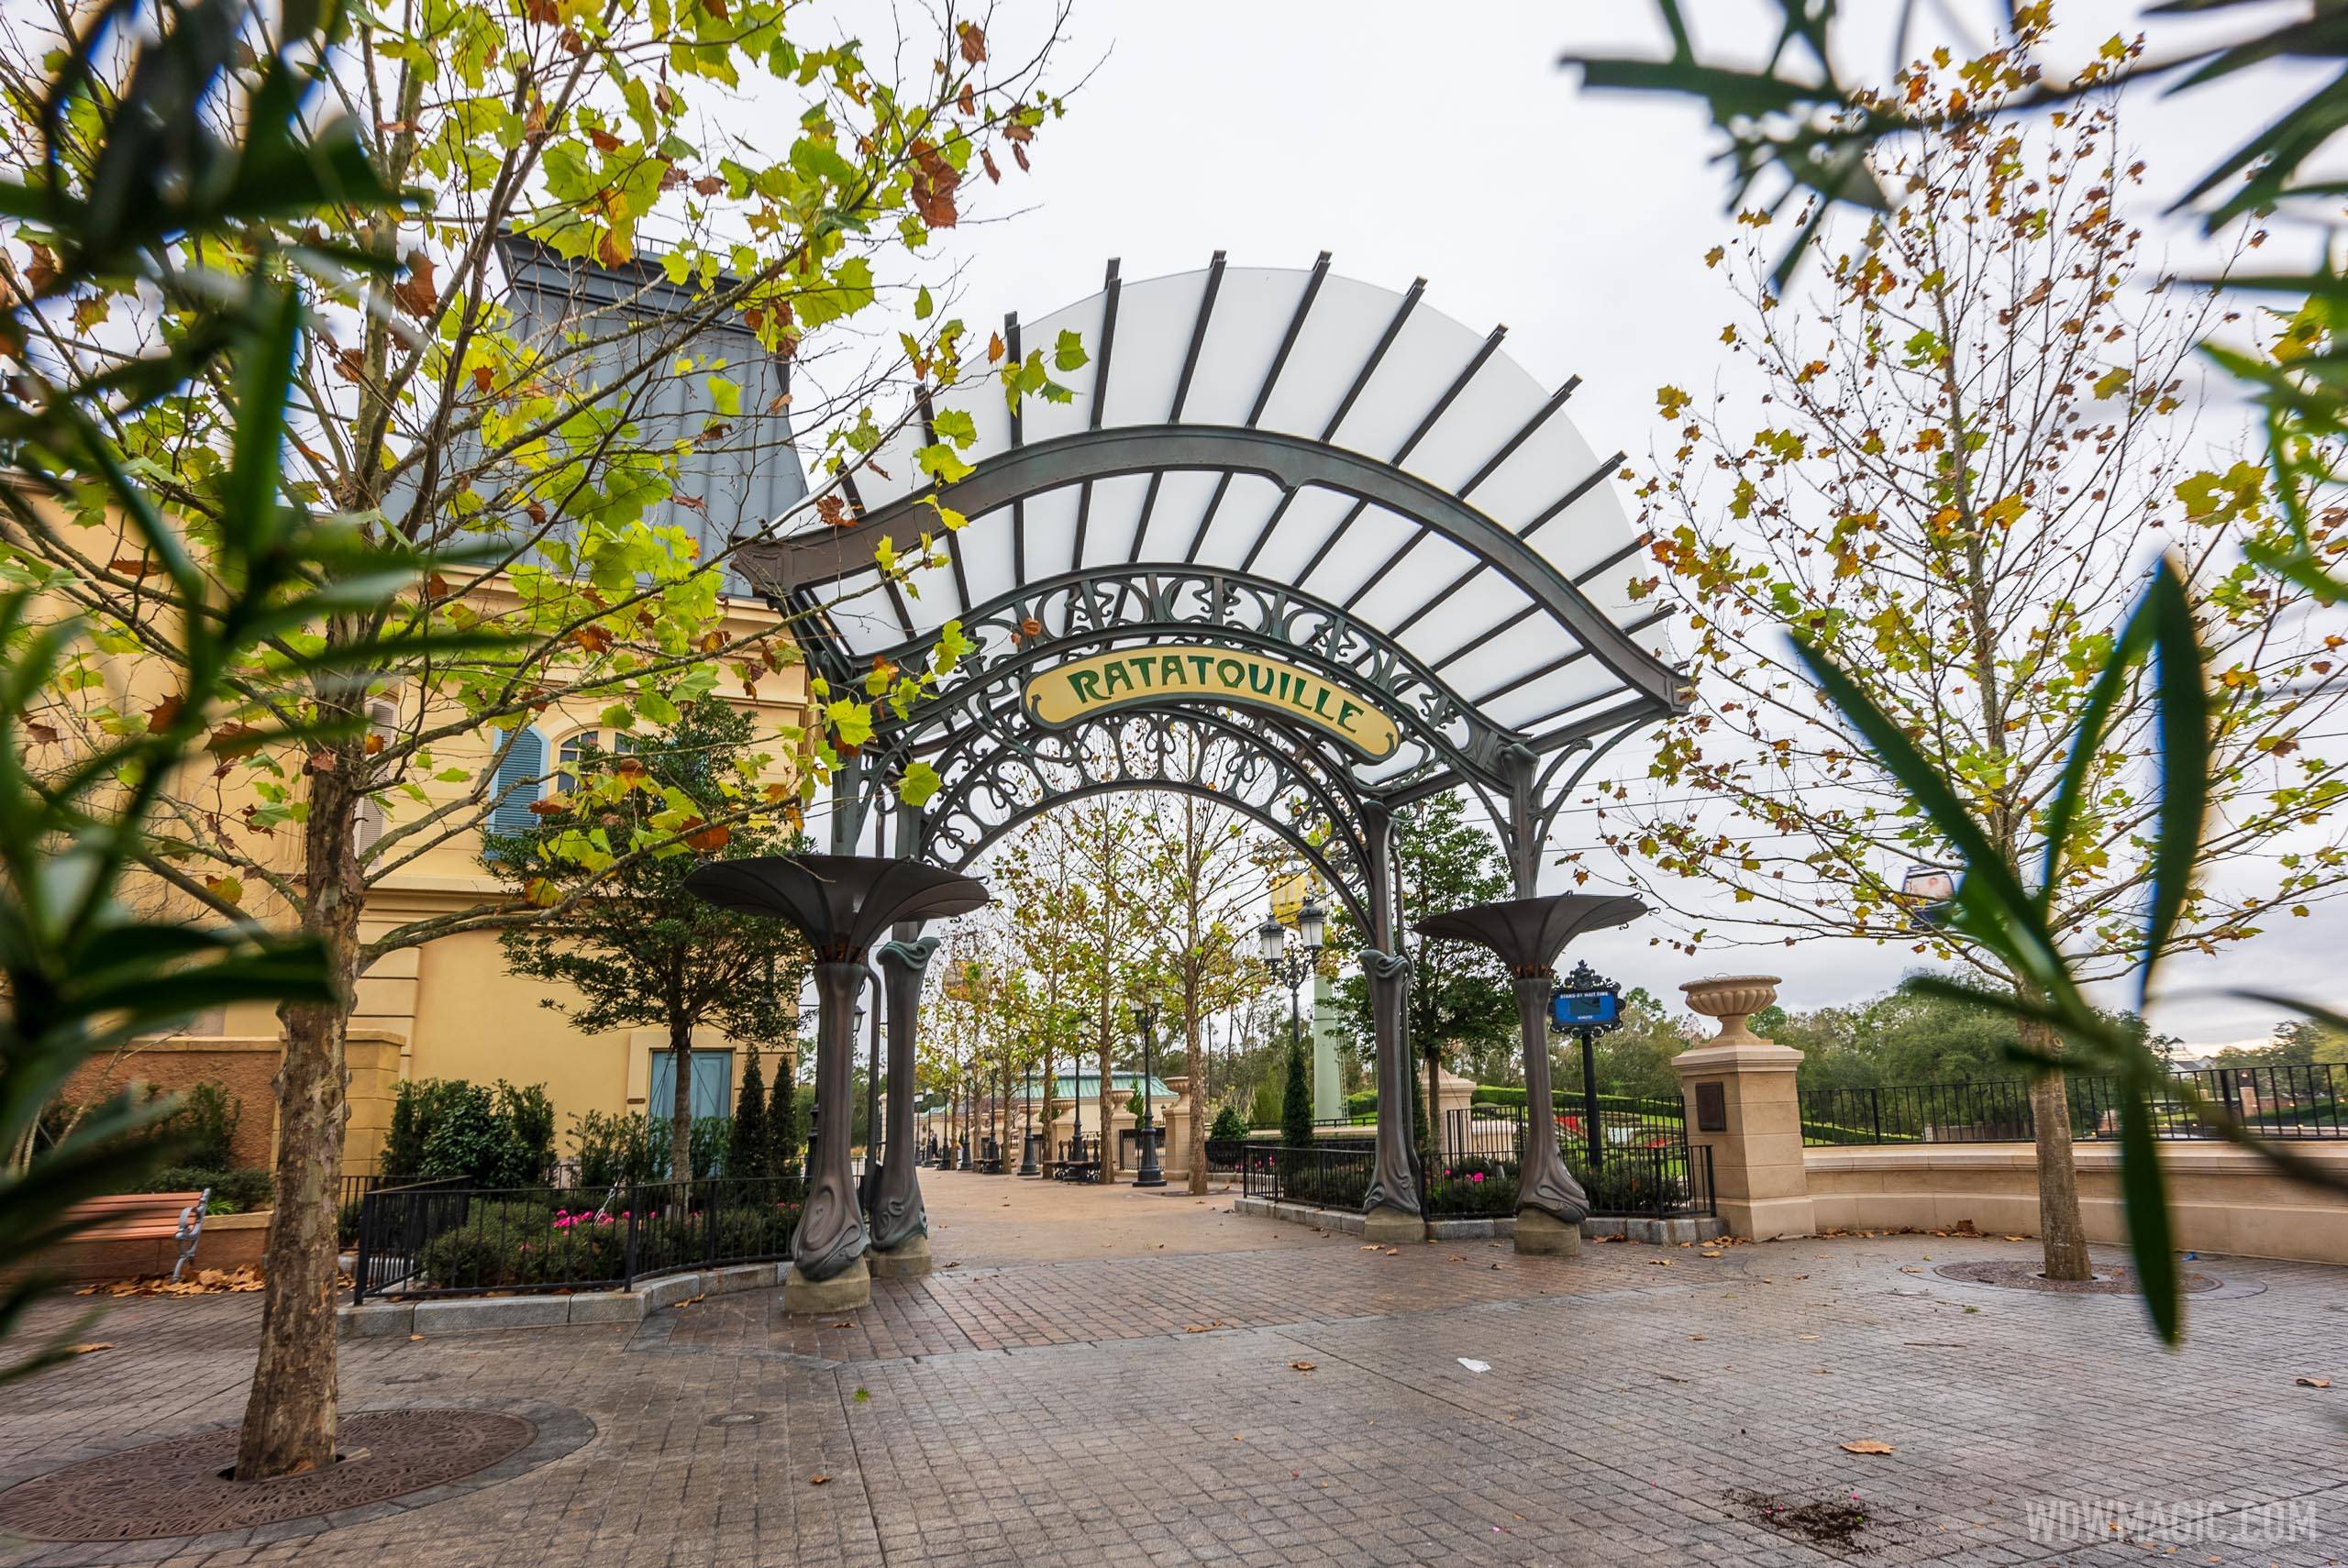 Construction walls down at Remy's Ratatouille Adventure entrance - January 12 2021